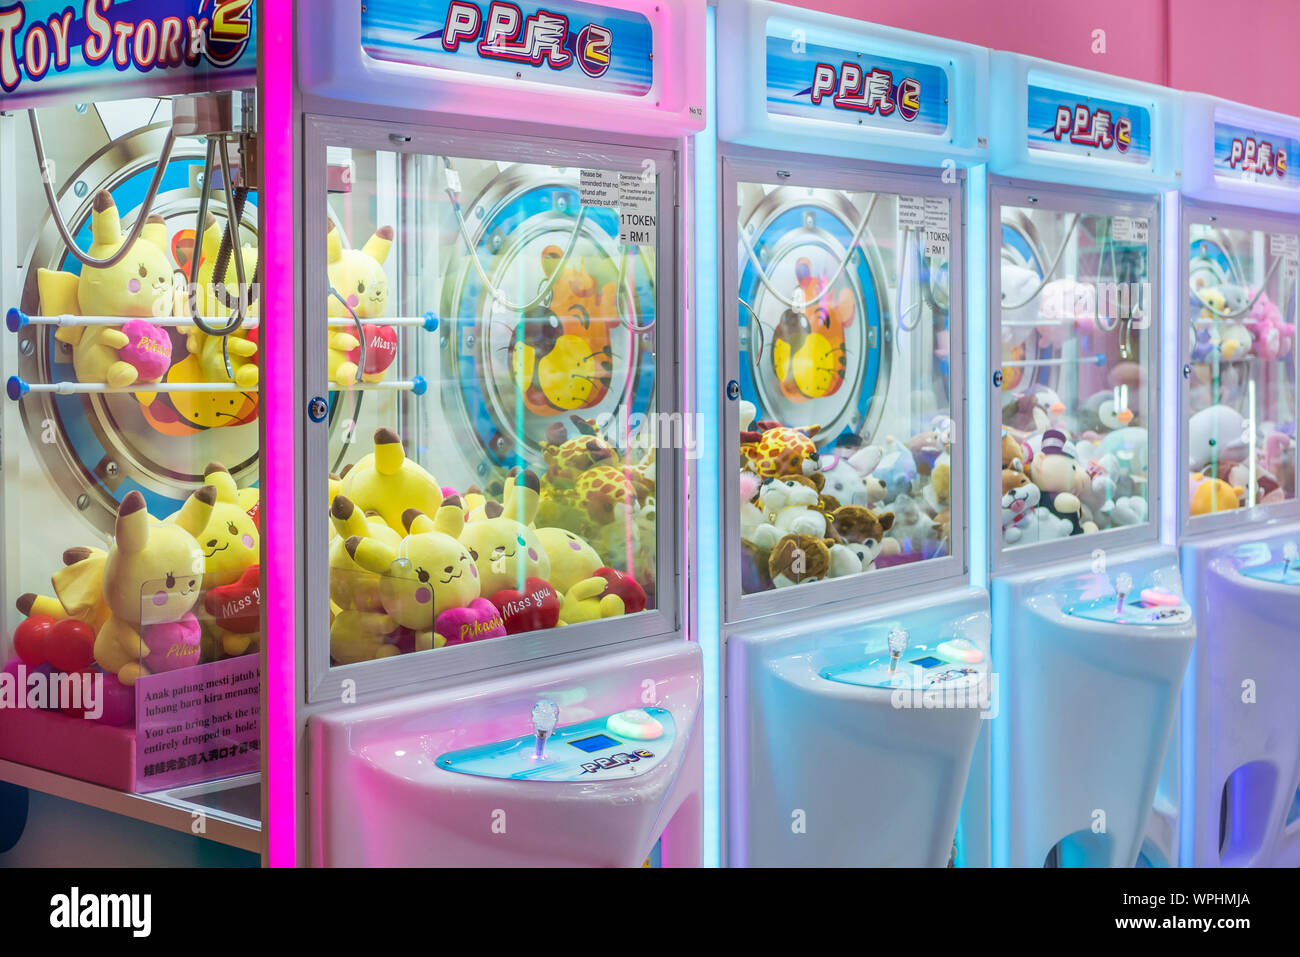 Kuala Lumpur,Malaysia - September 7,2019 : Colorful arcade game toy claw crane machine where people can win toys and other prizes. Stock Photo